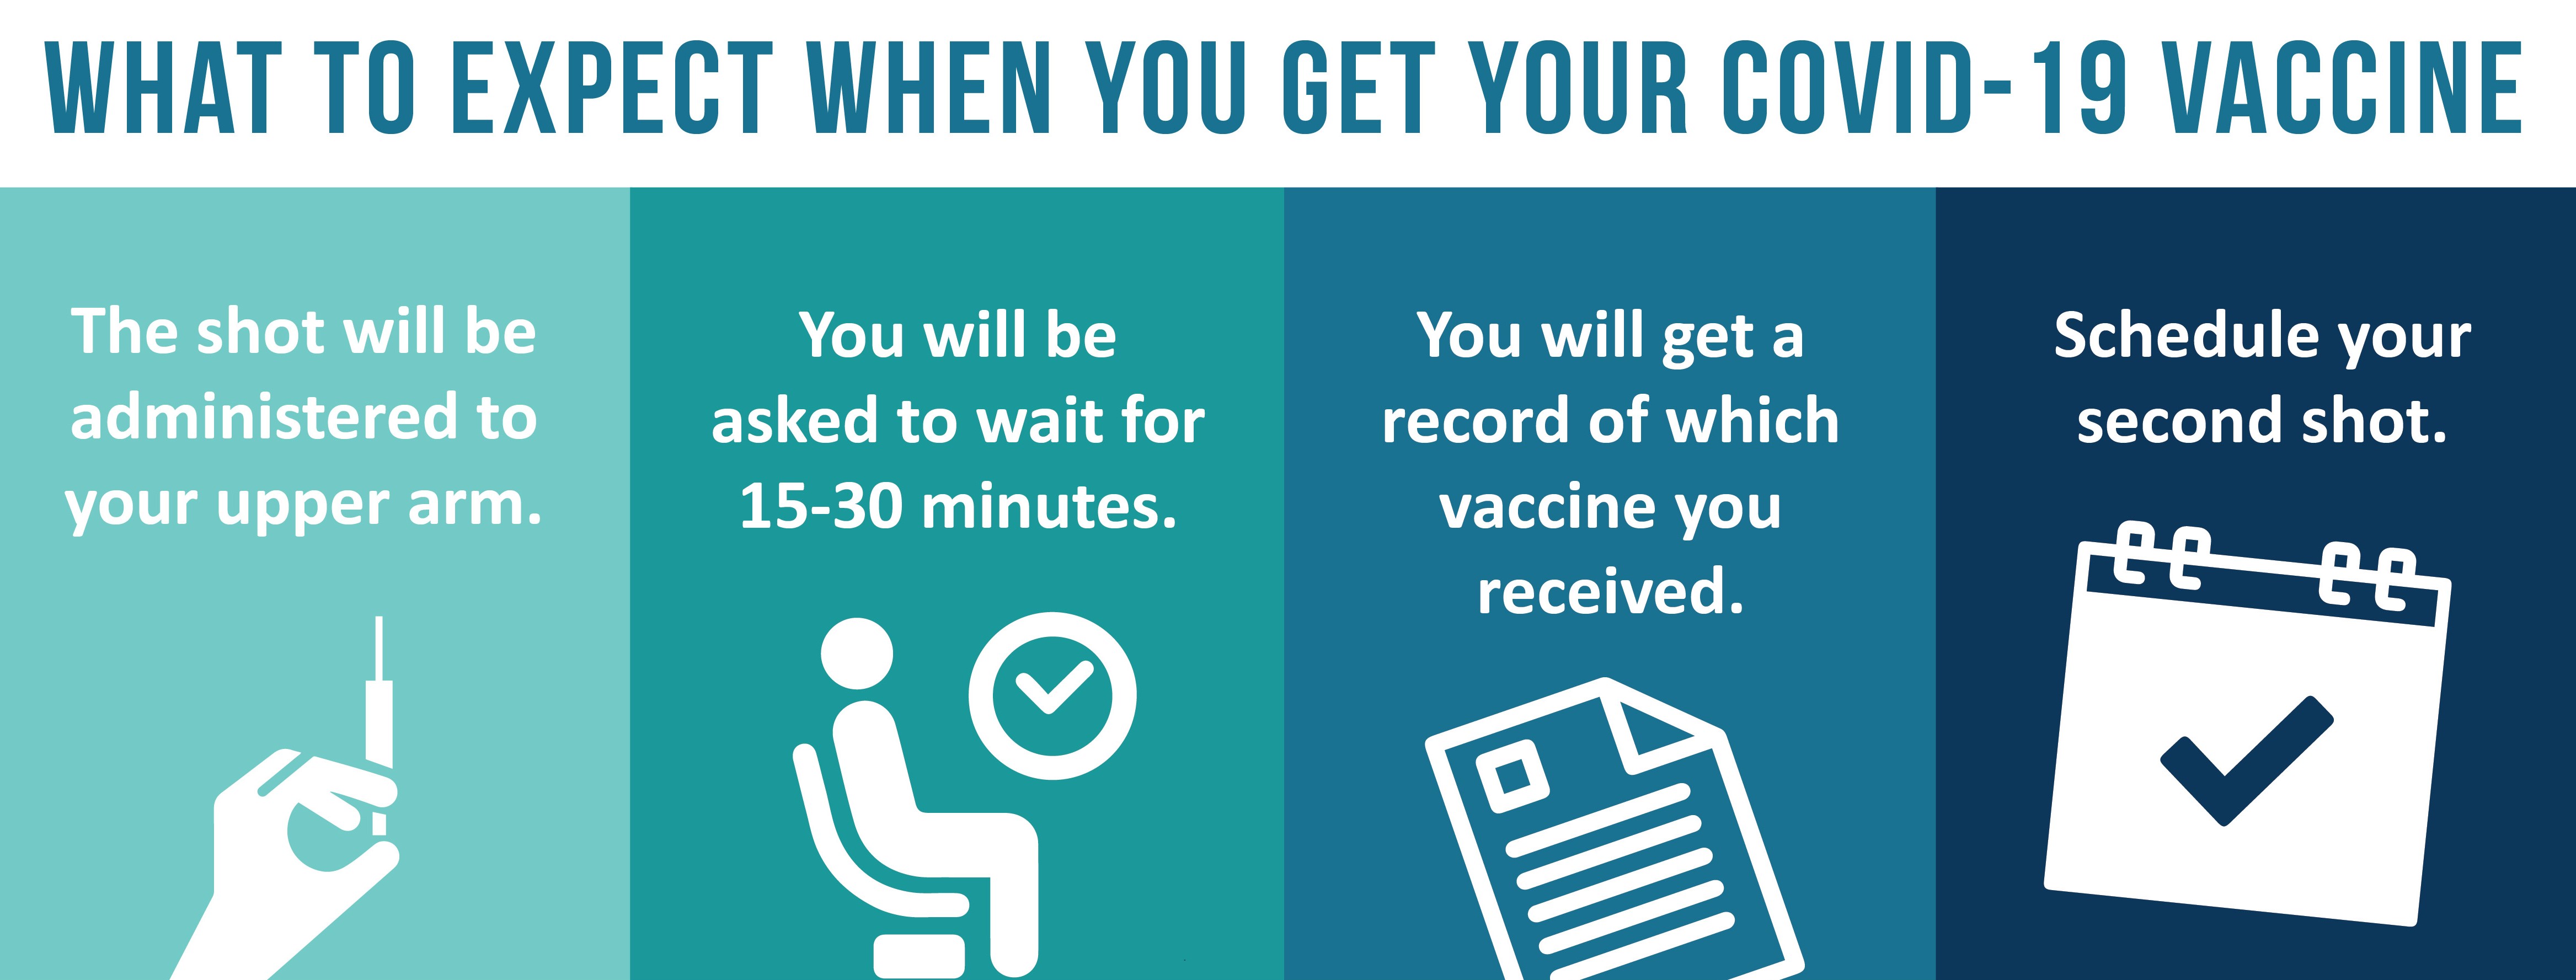 what to expect with COVID-19 vaccine